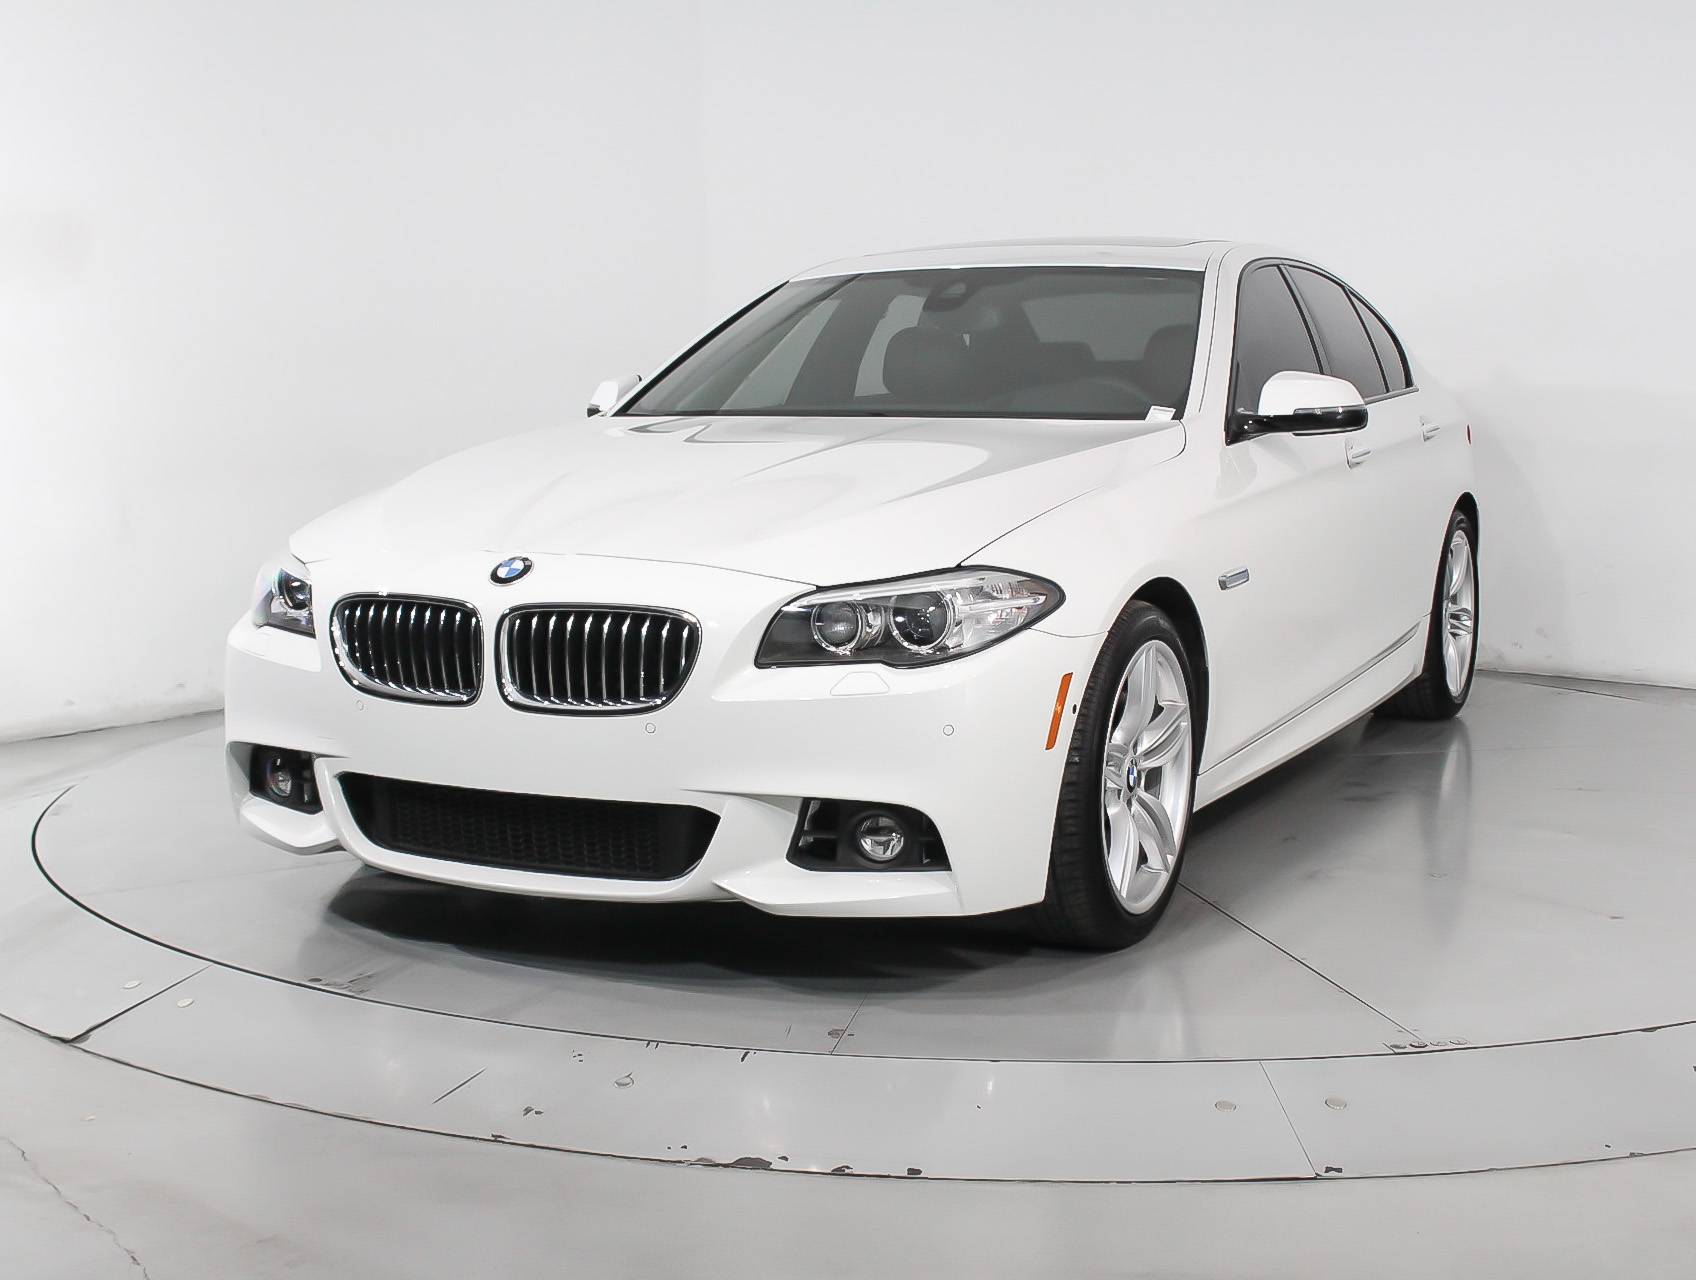 Used 2016 Bmw 5 Series 535i M Sport Sedan For Sale In West Palm